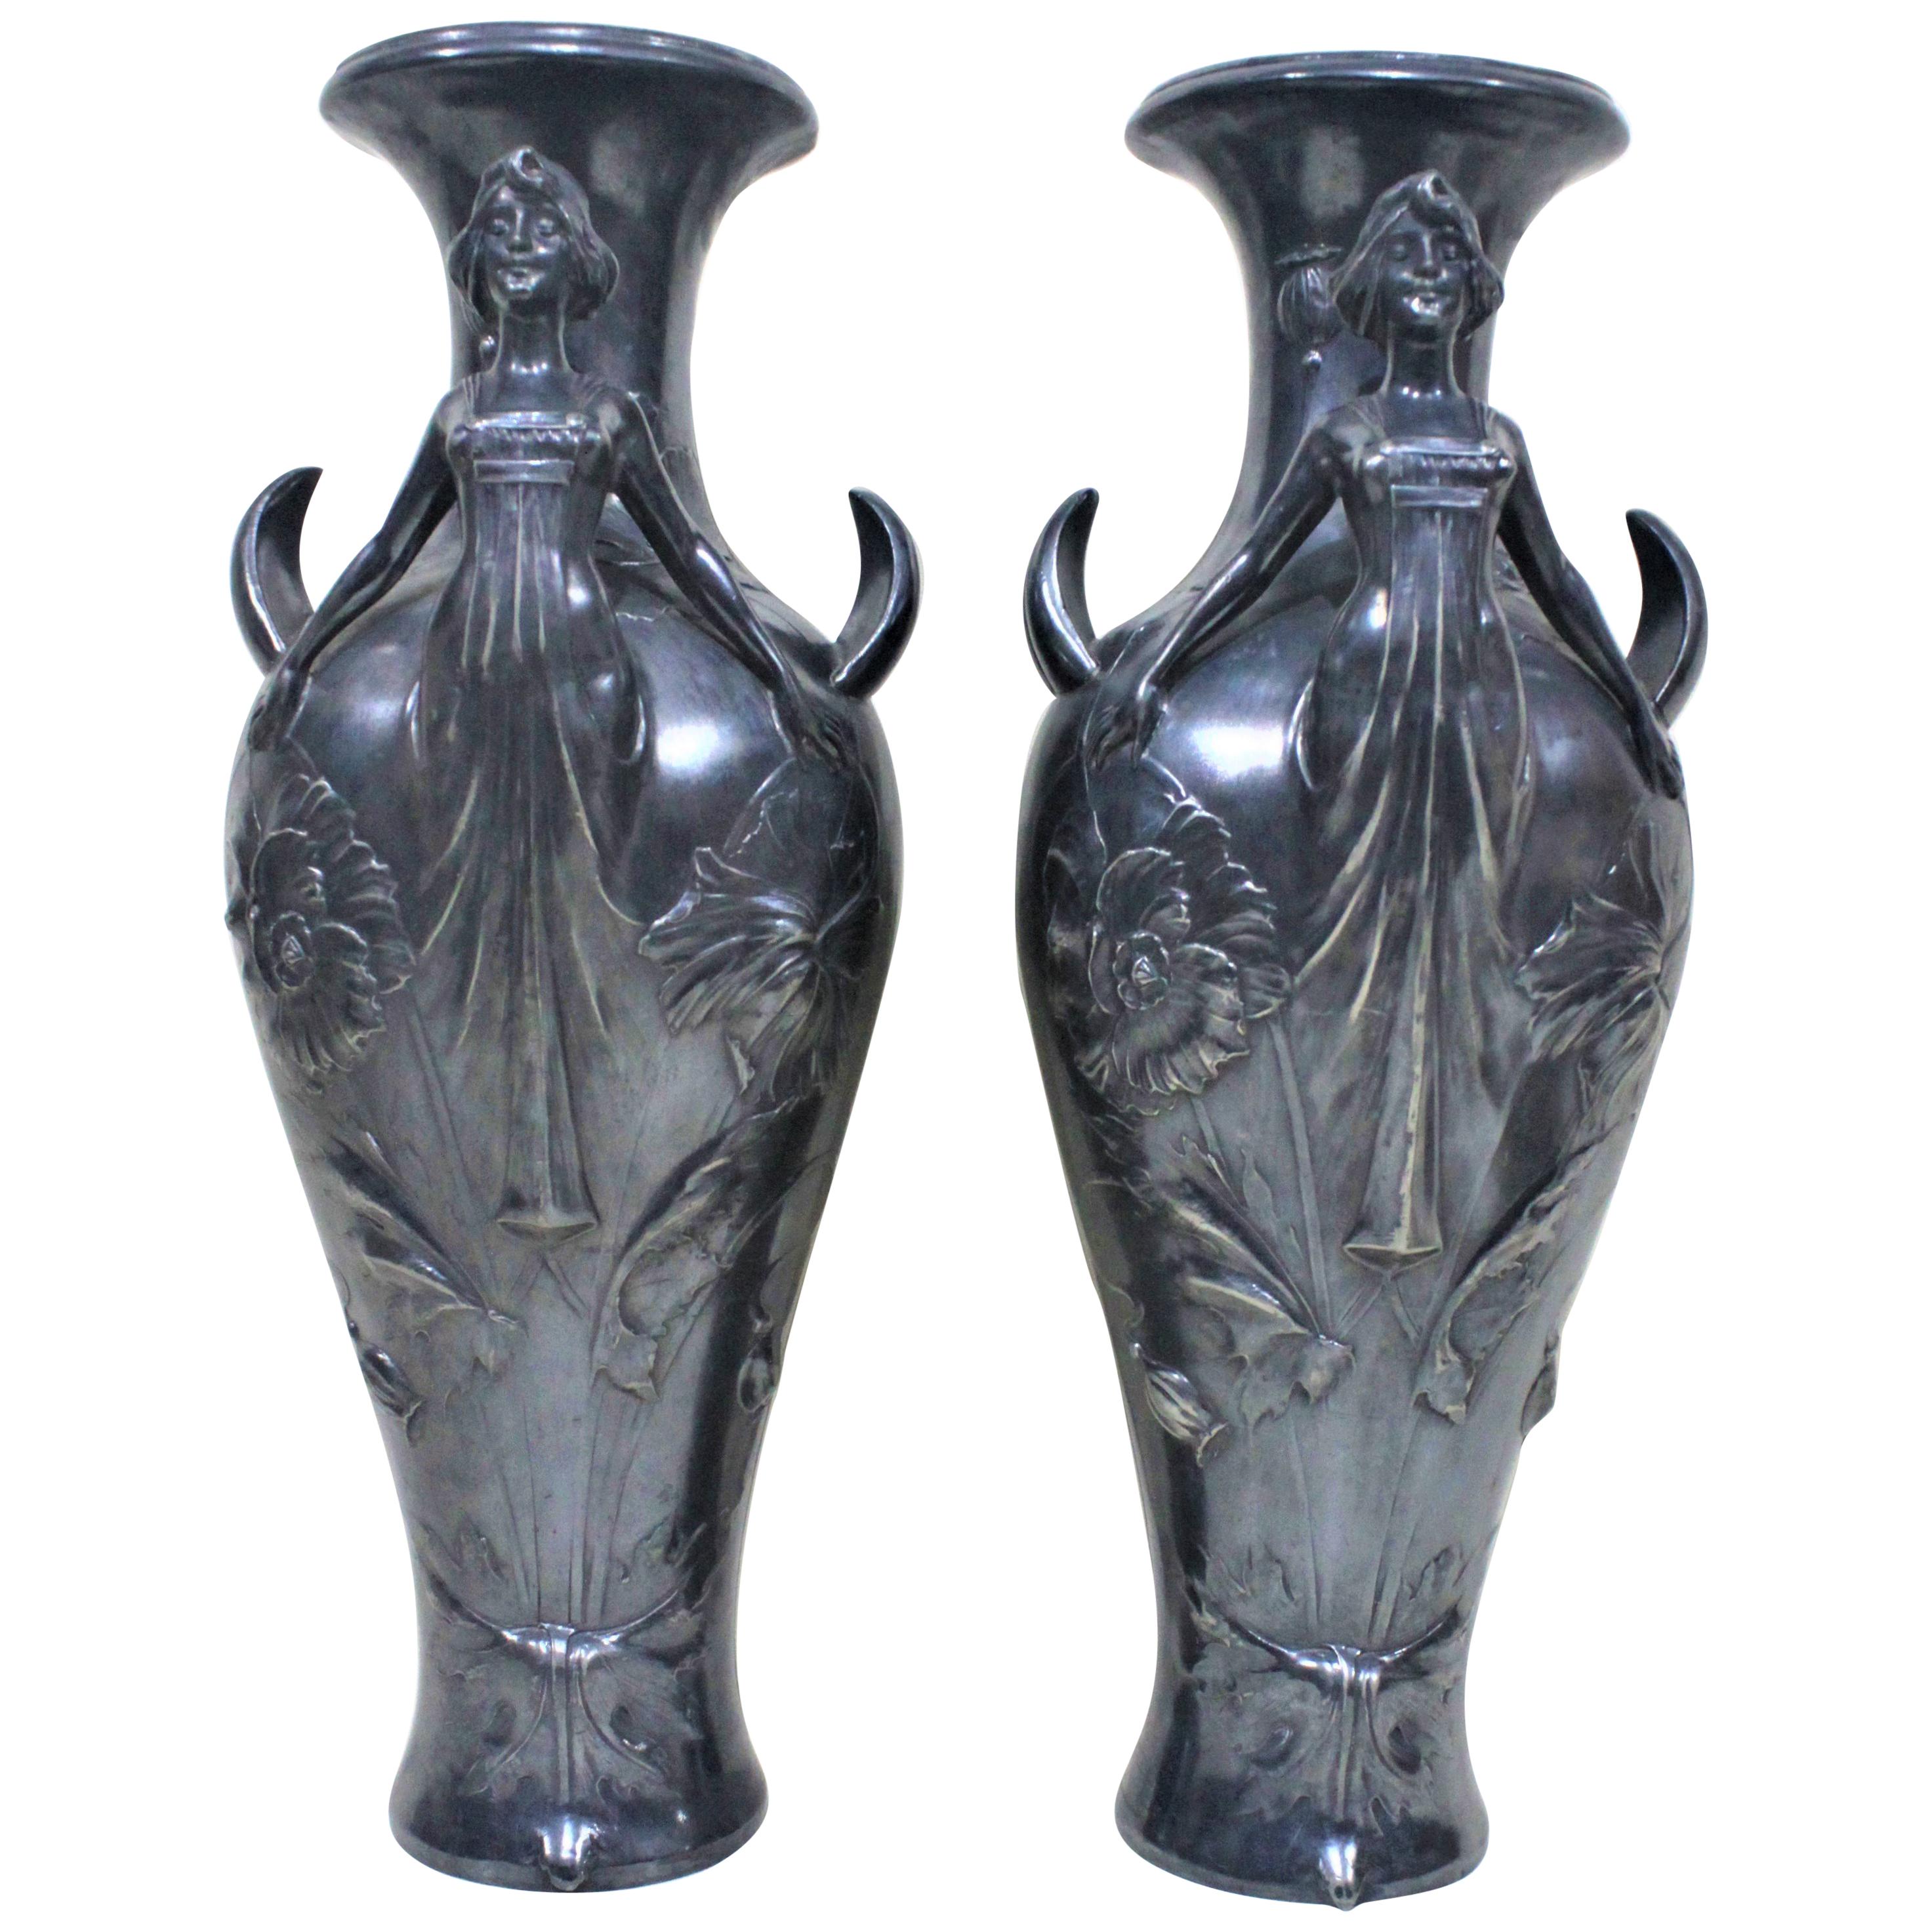 Pair of Art Nouveau Silver Plated Vases with Stylized Female Figures